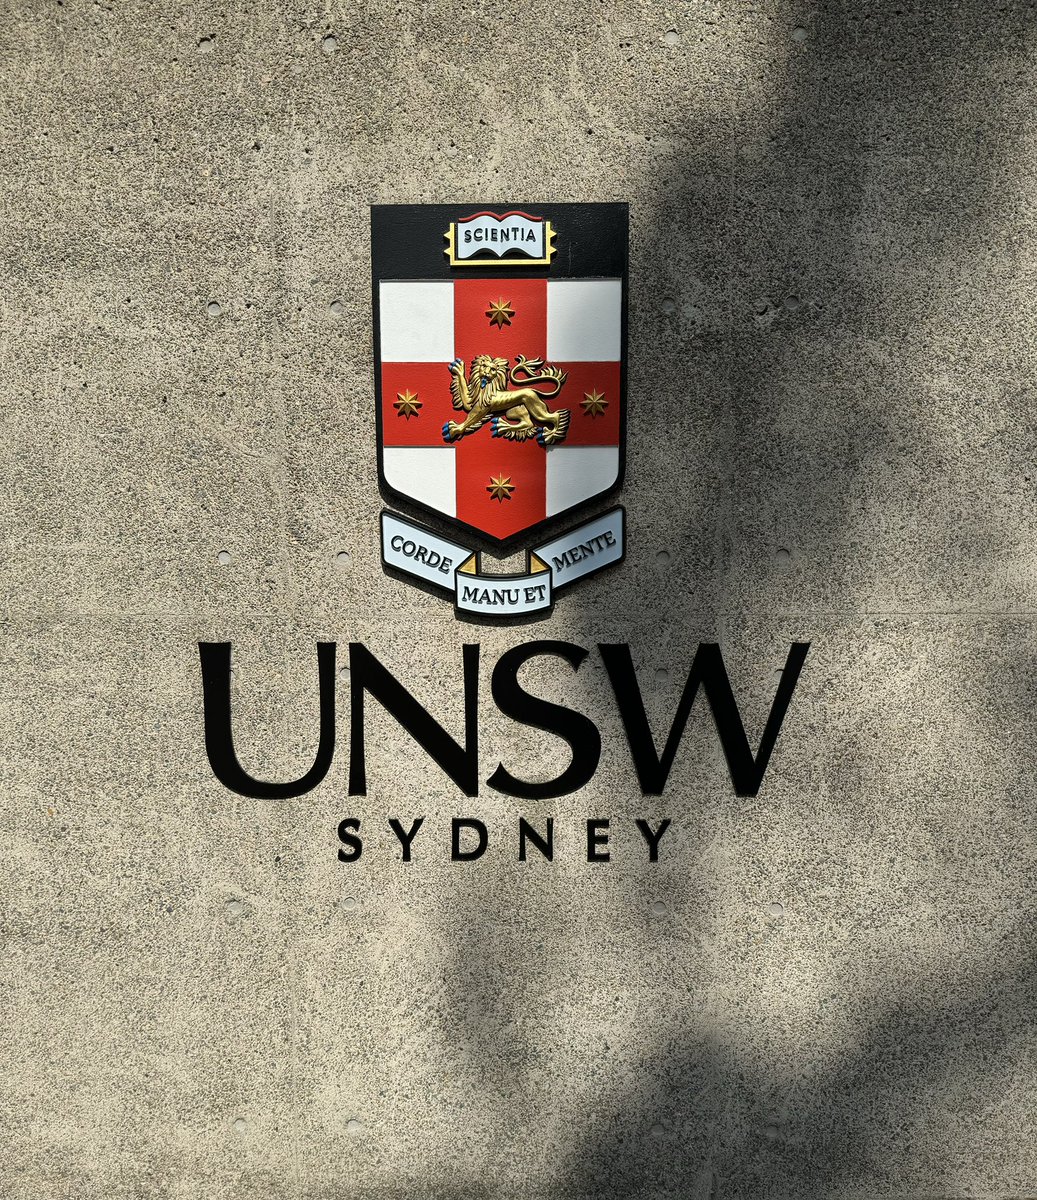 Great to be back on campus @UNSW!